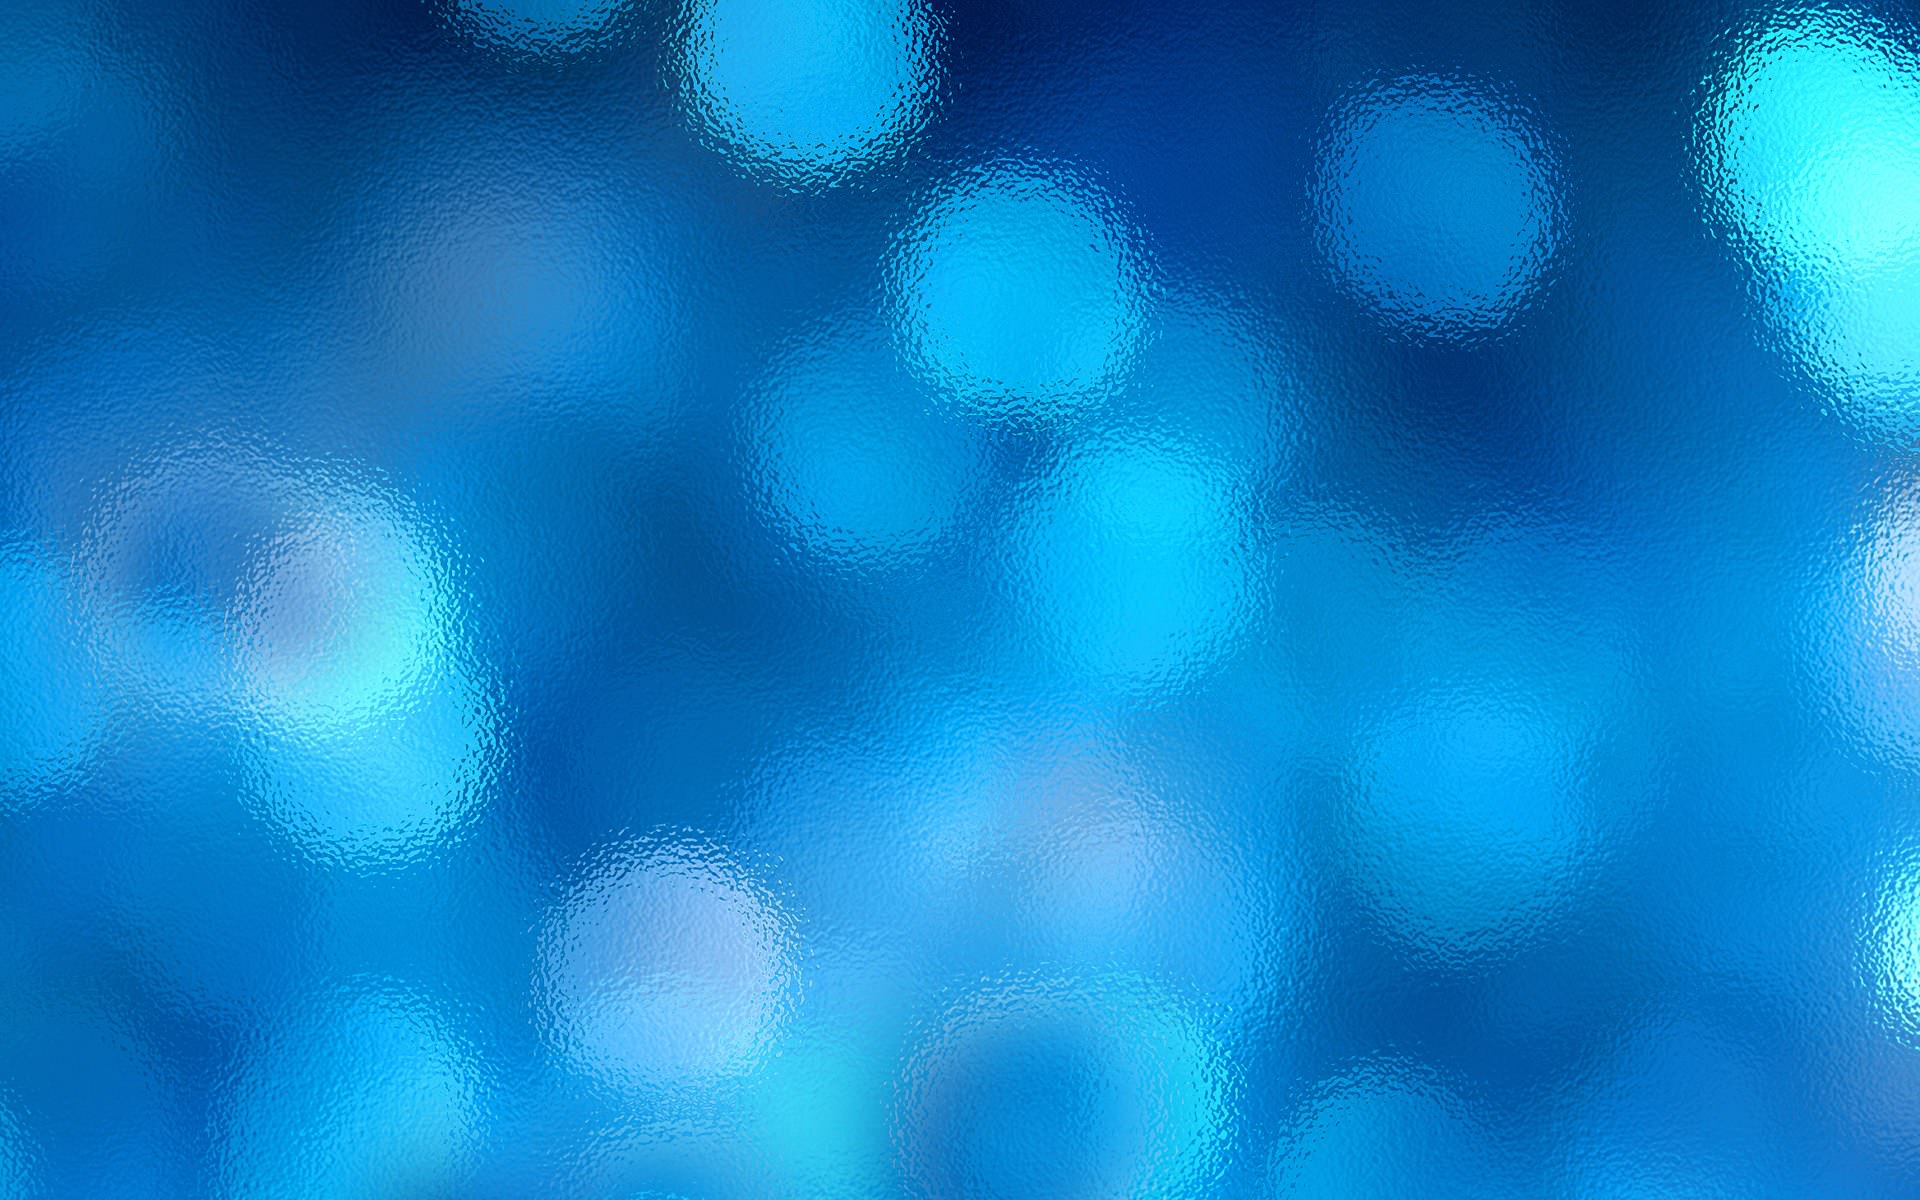 21 Blue Abstract Wallpapers Backgrounds Pictures Images Freecreatives